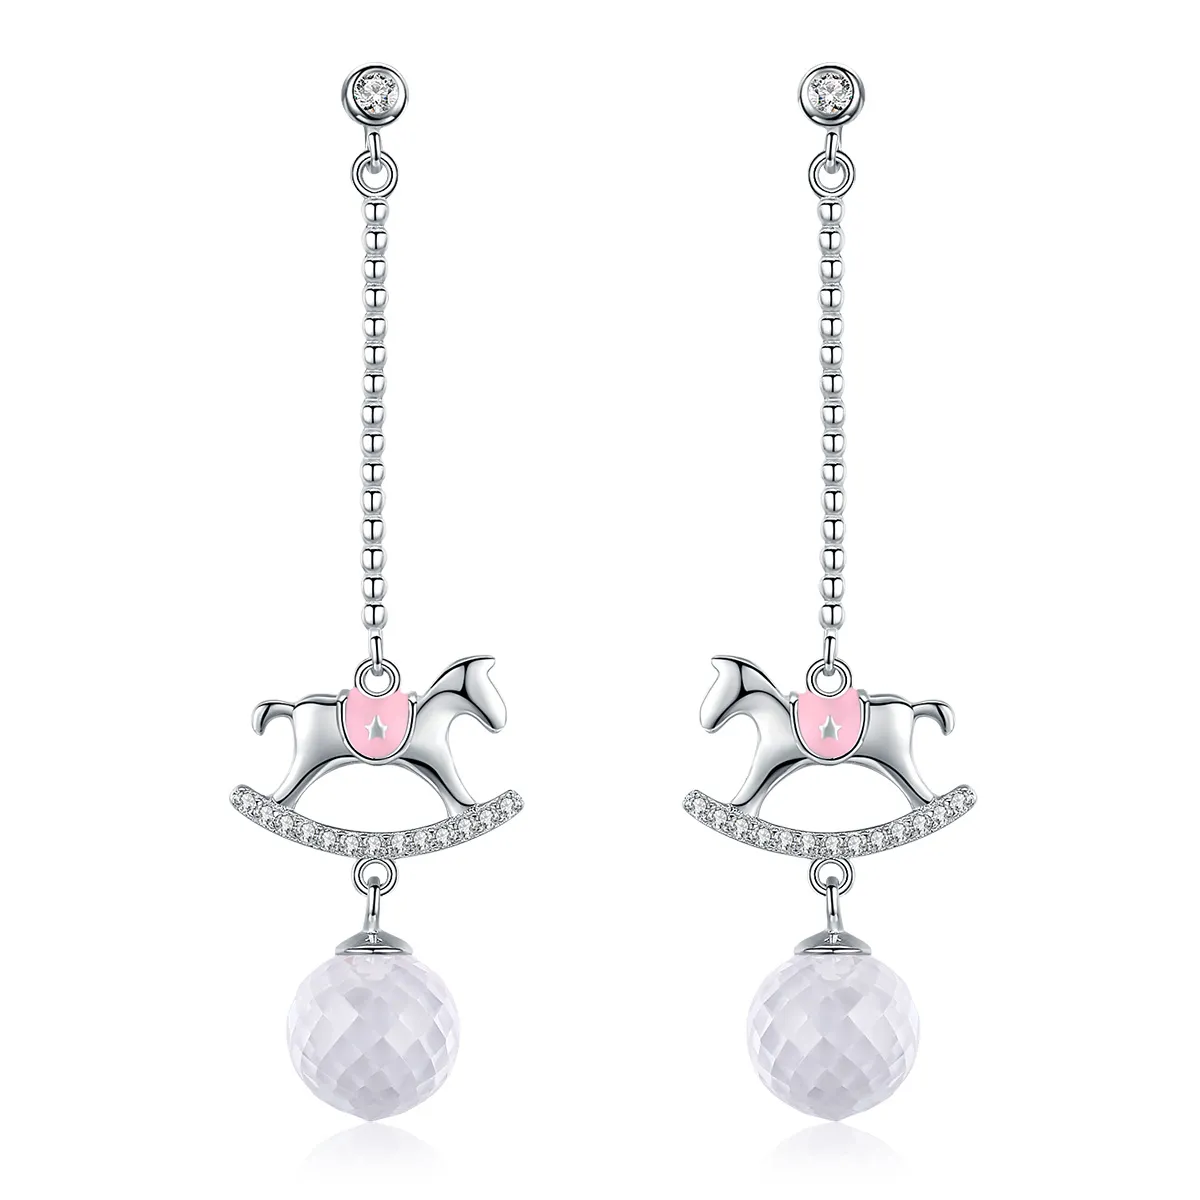 Pandora Style Playground Hanging Earrings - BSE038